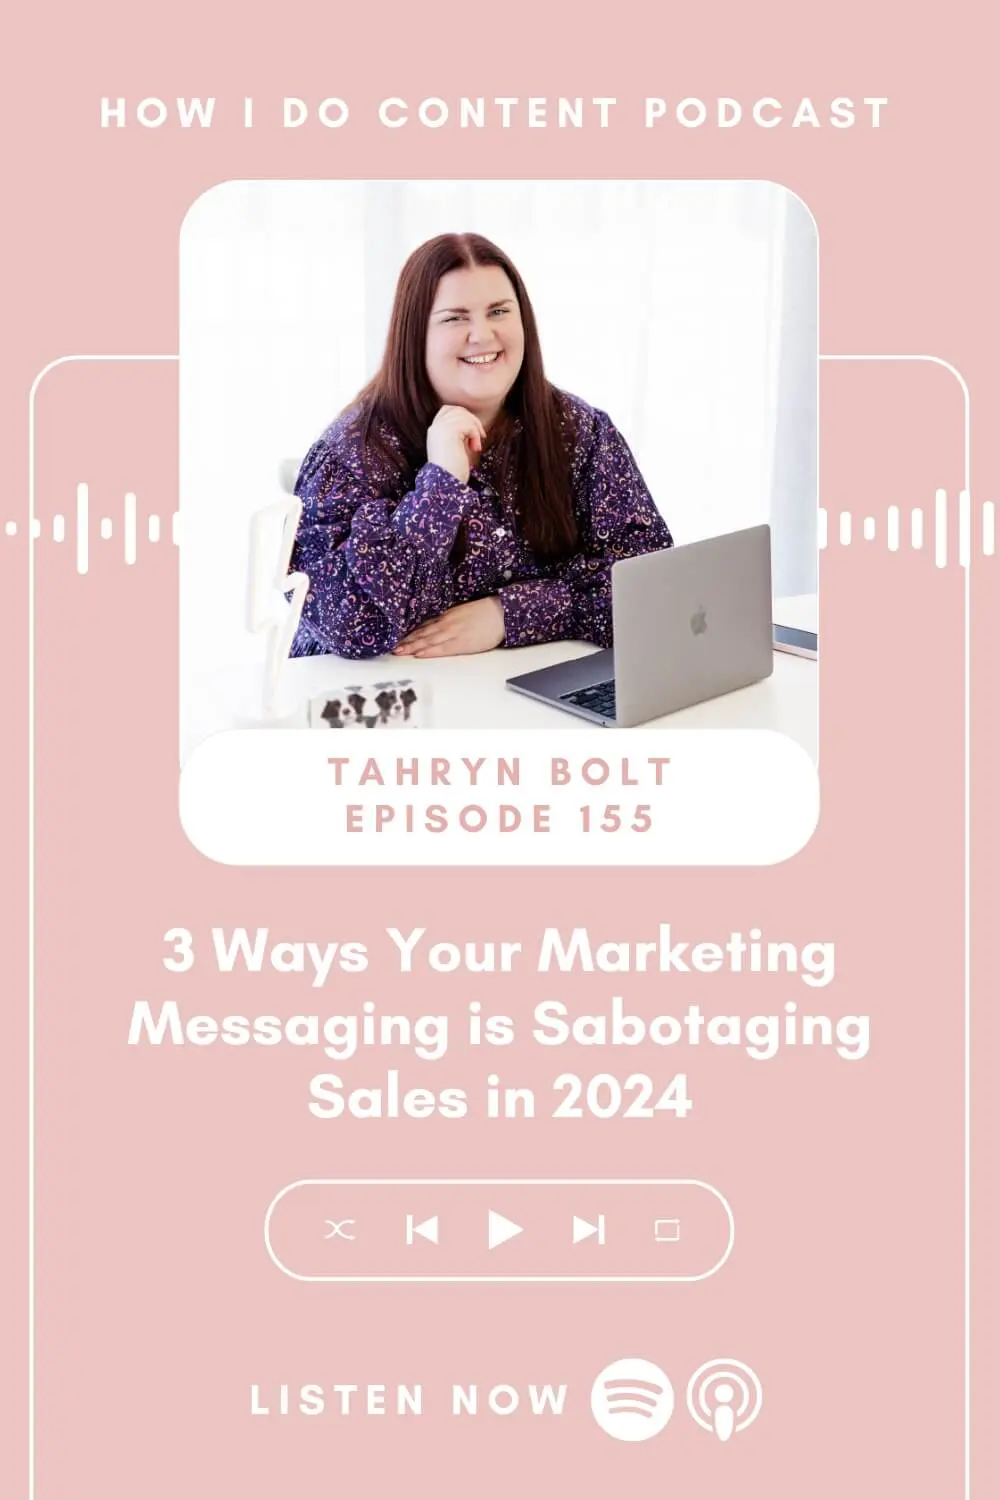 3 Ways Your Marketing Messaging is Sabotaging Sales in 2024